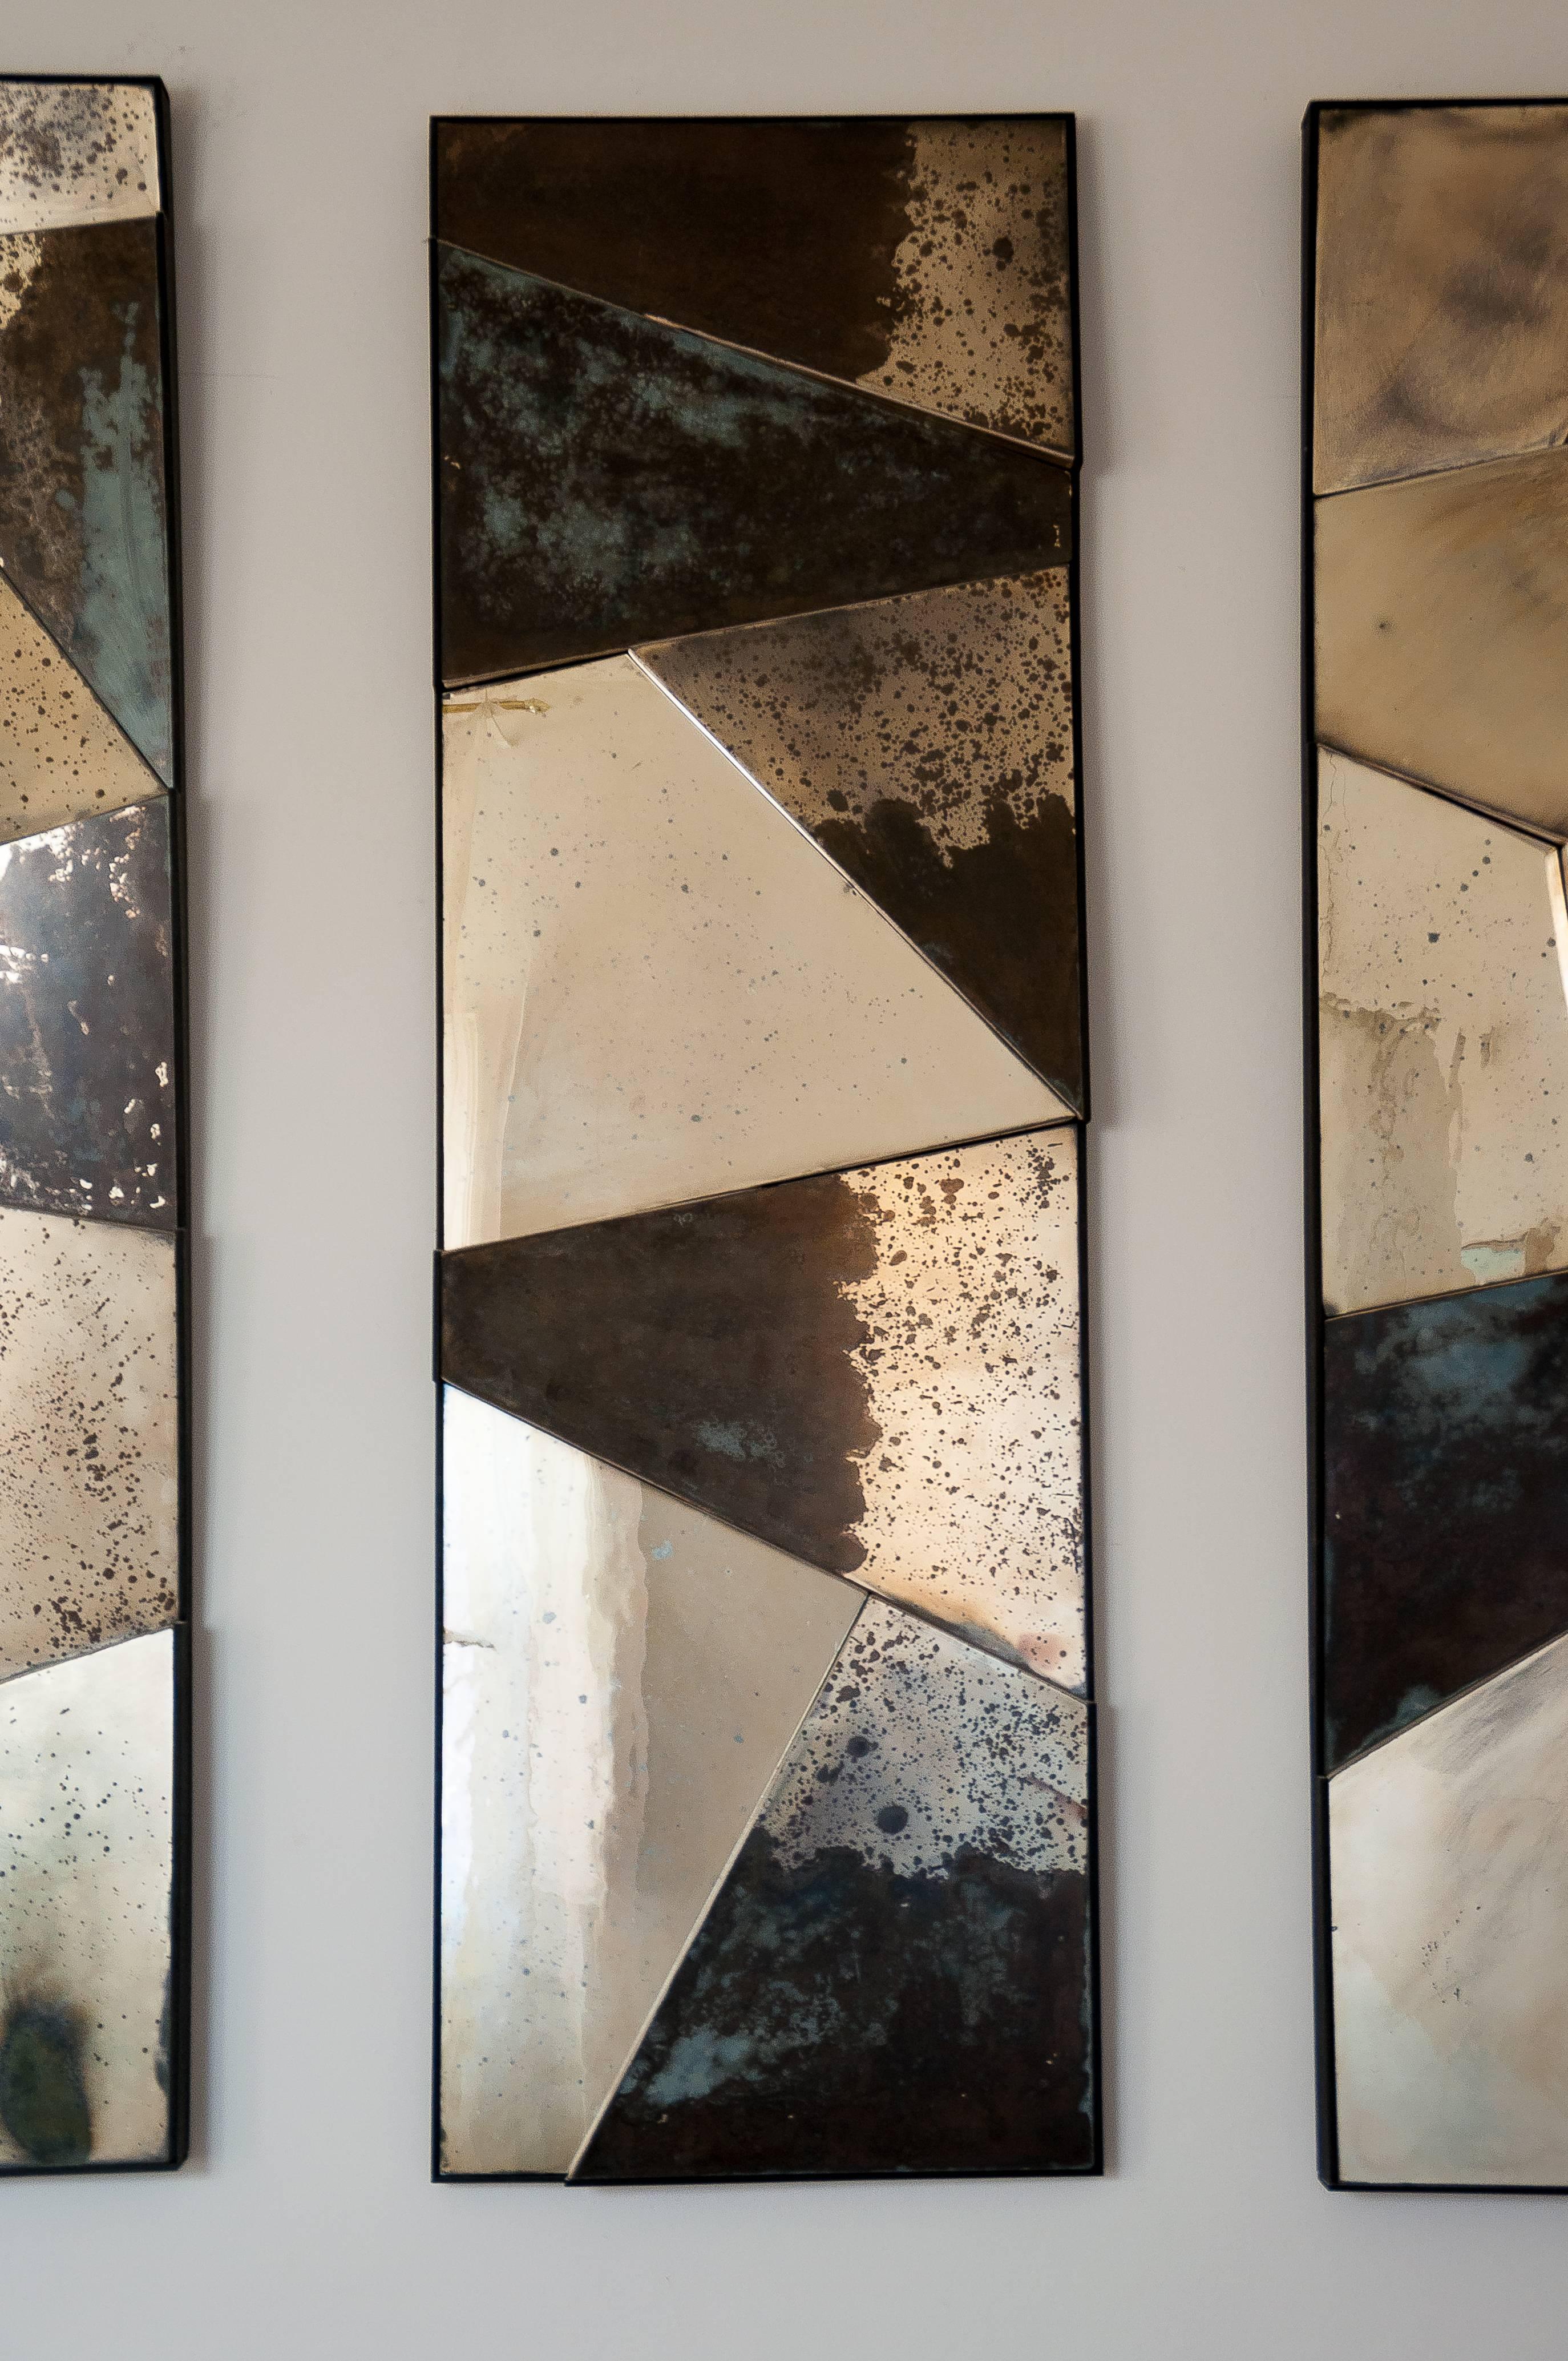 Three-dimensional mirror sculpture in contemporary silver glass.
The pieces radiate reflections and interact with the surrounding environment with elegance and character. The edges, made of dark vengé wood, are irregularly cut following the glass